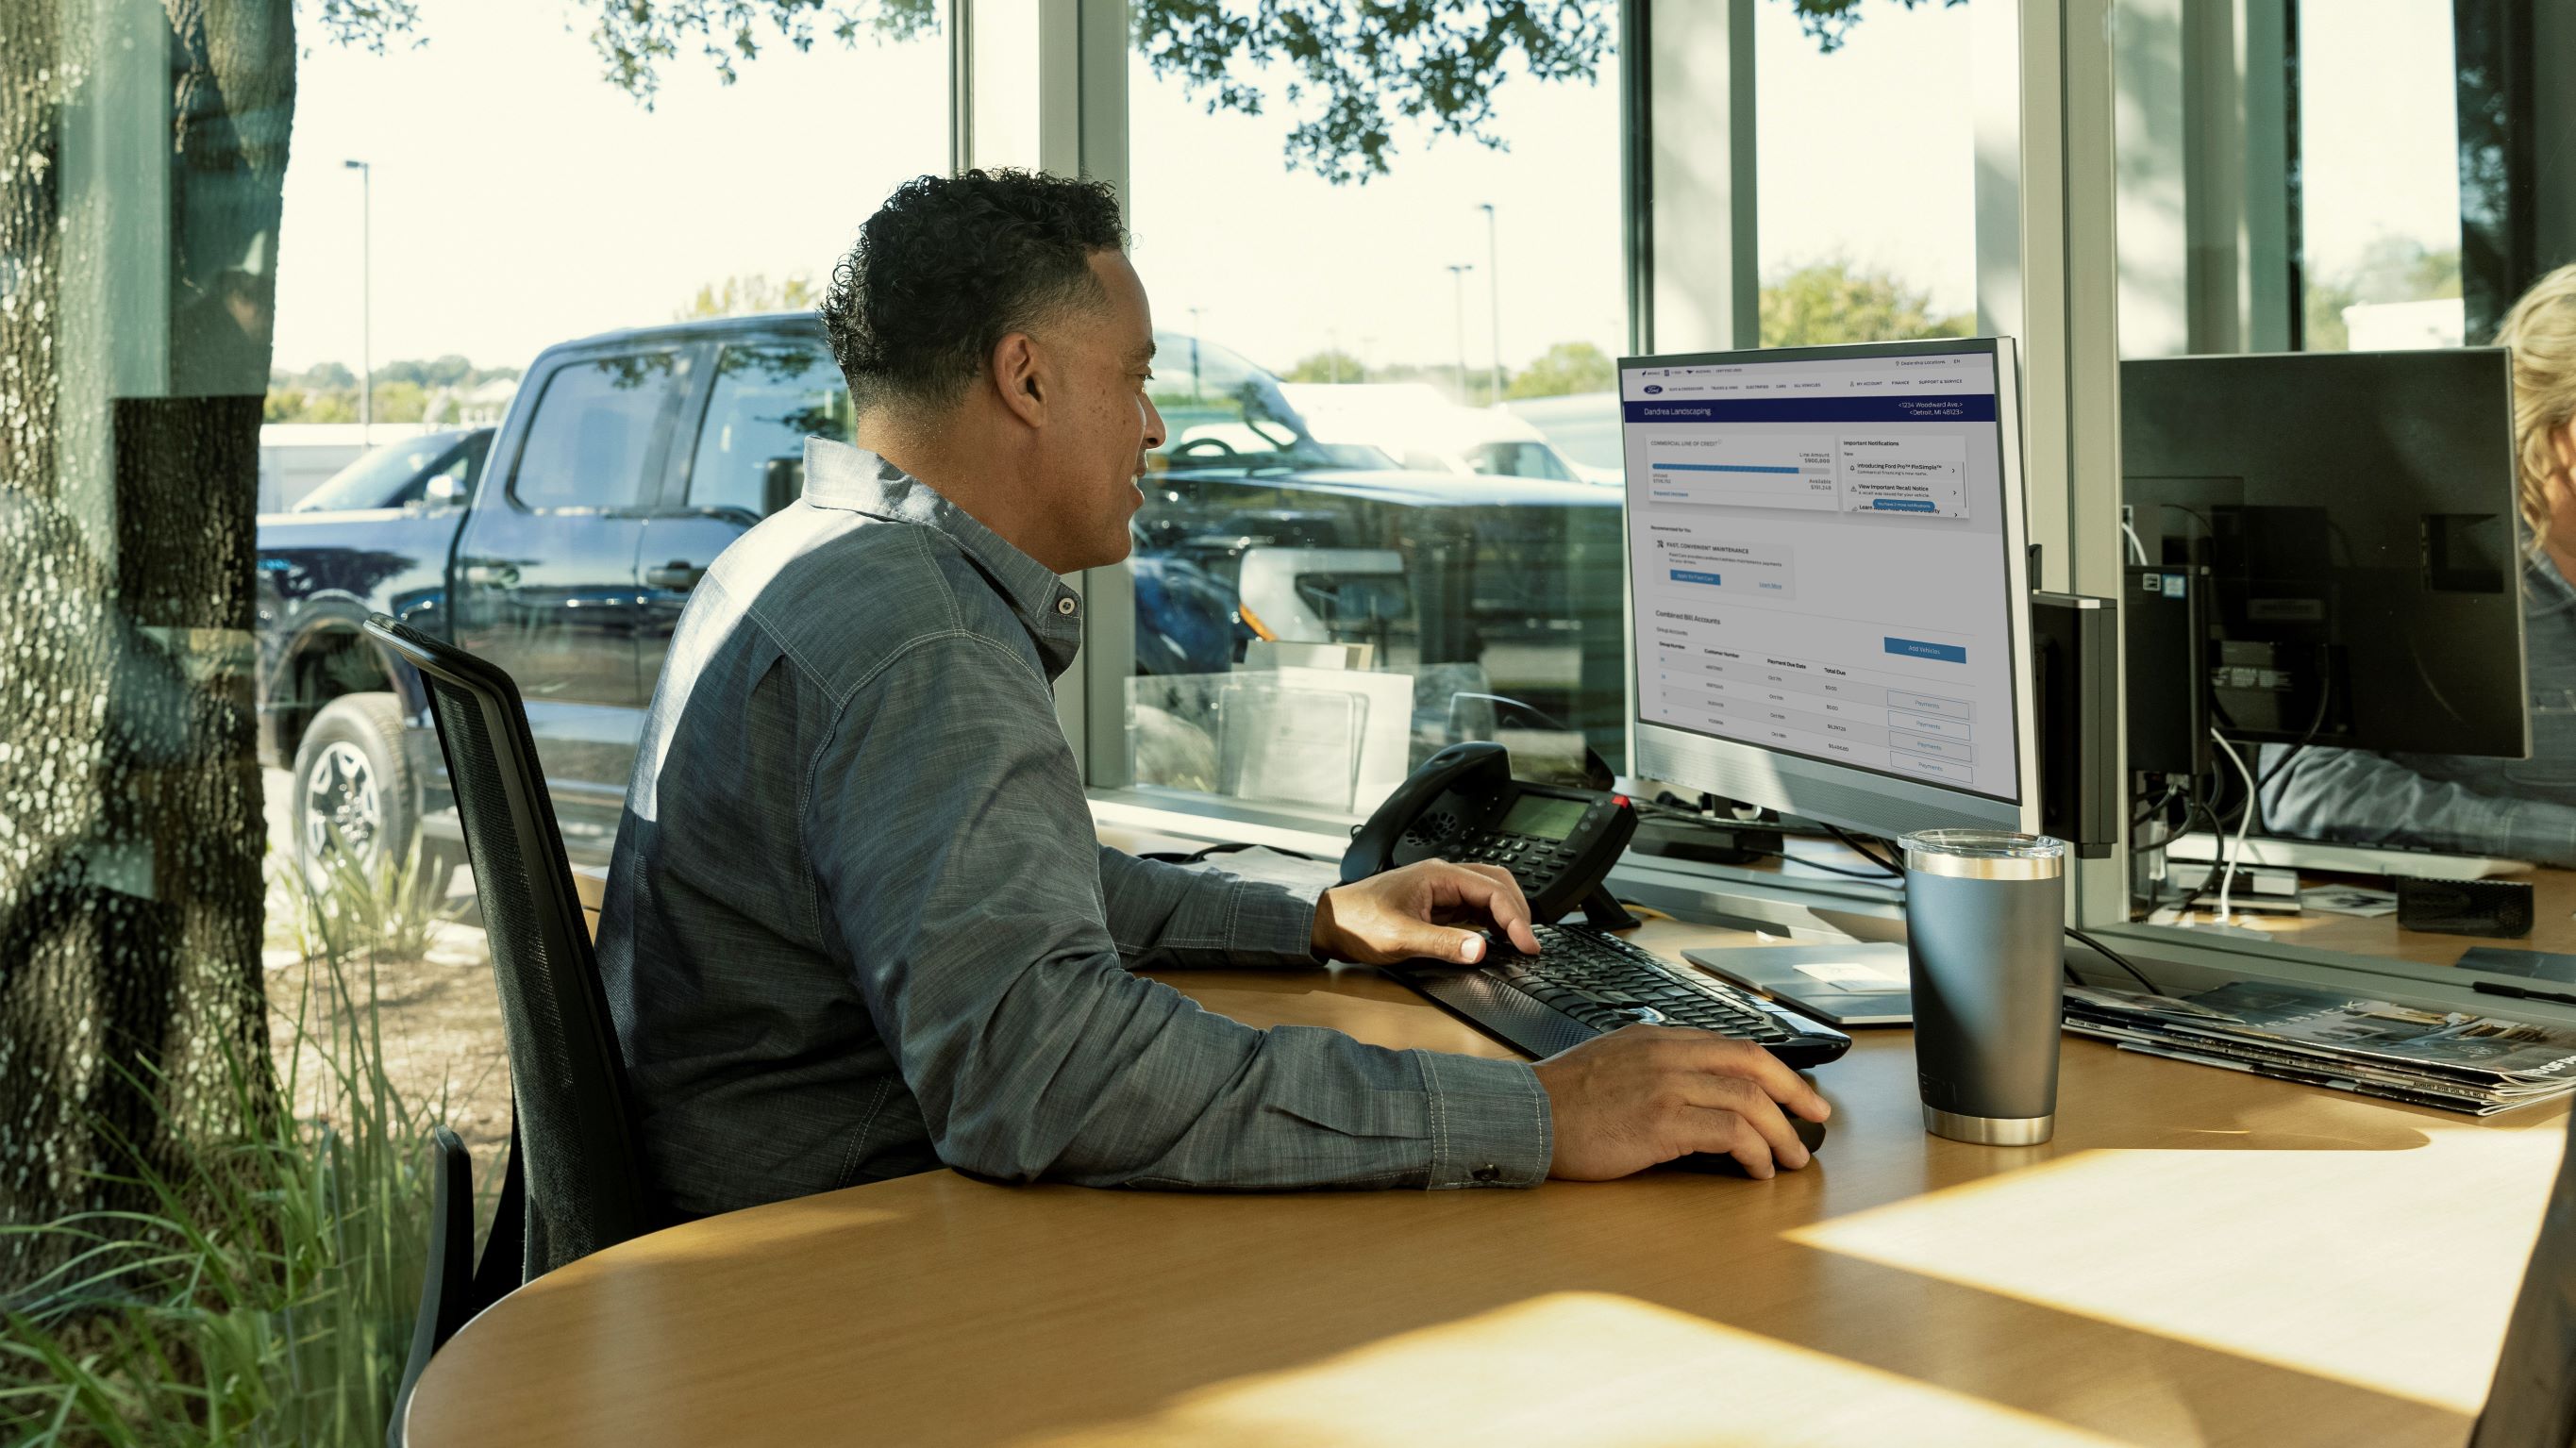 A man, presumably a fleet manager, sitting at a desk. He is viewing a page on large computer monitor. In the background, outside a window, a Ford Etransit is parked.